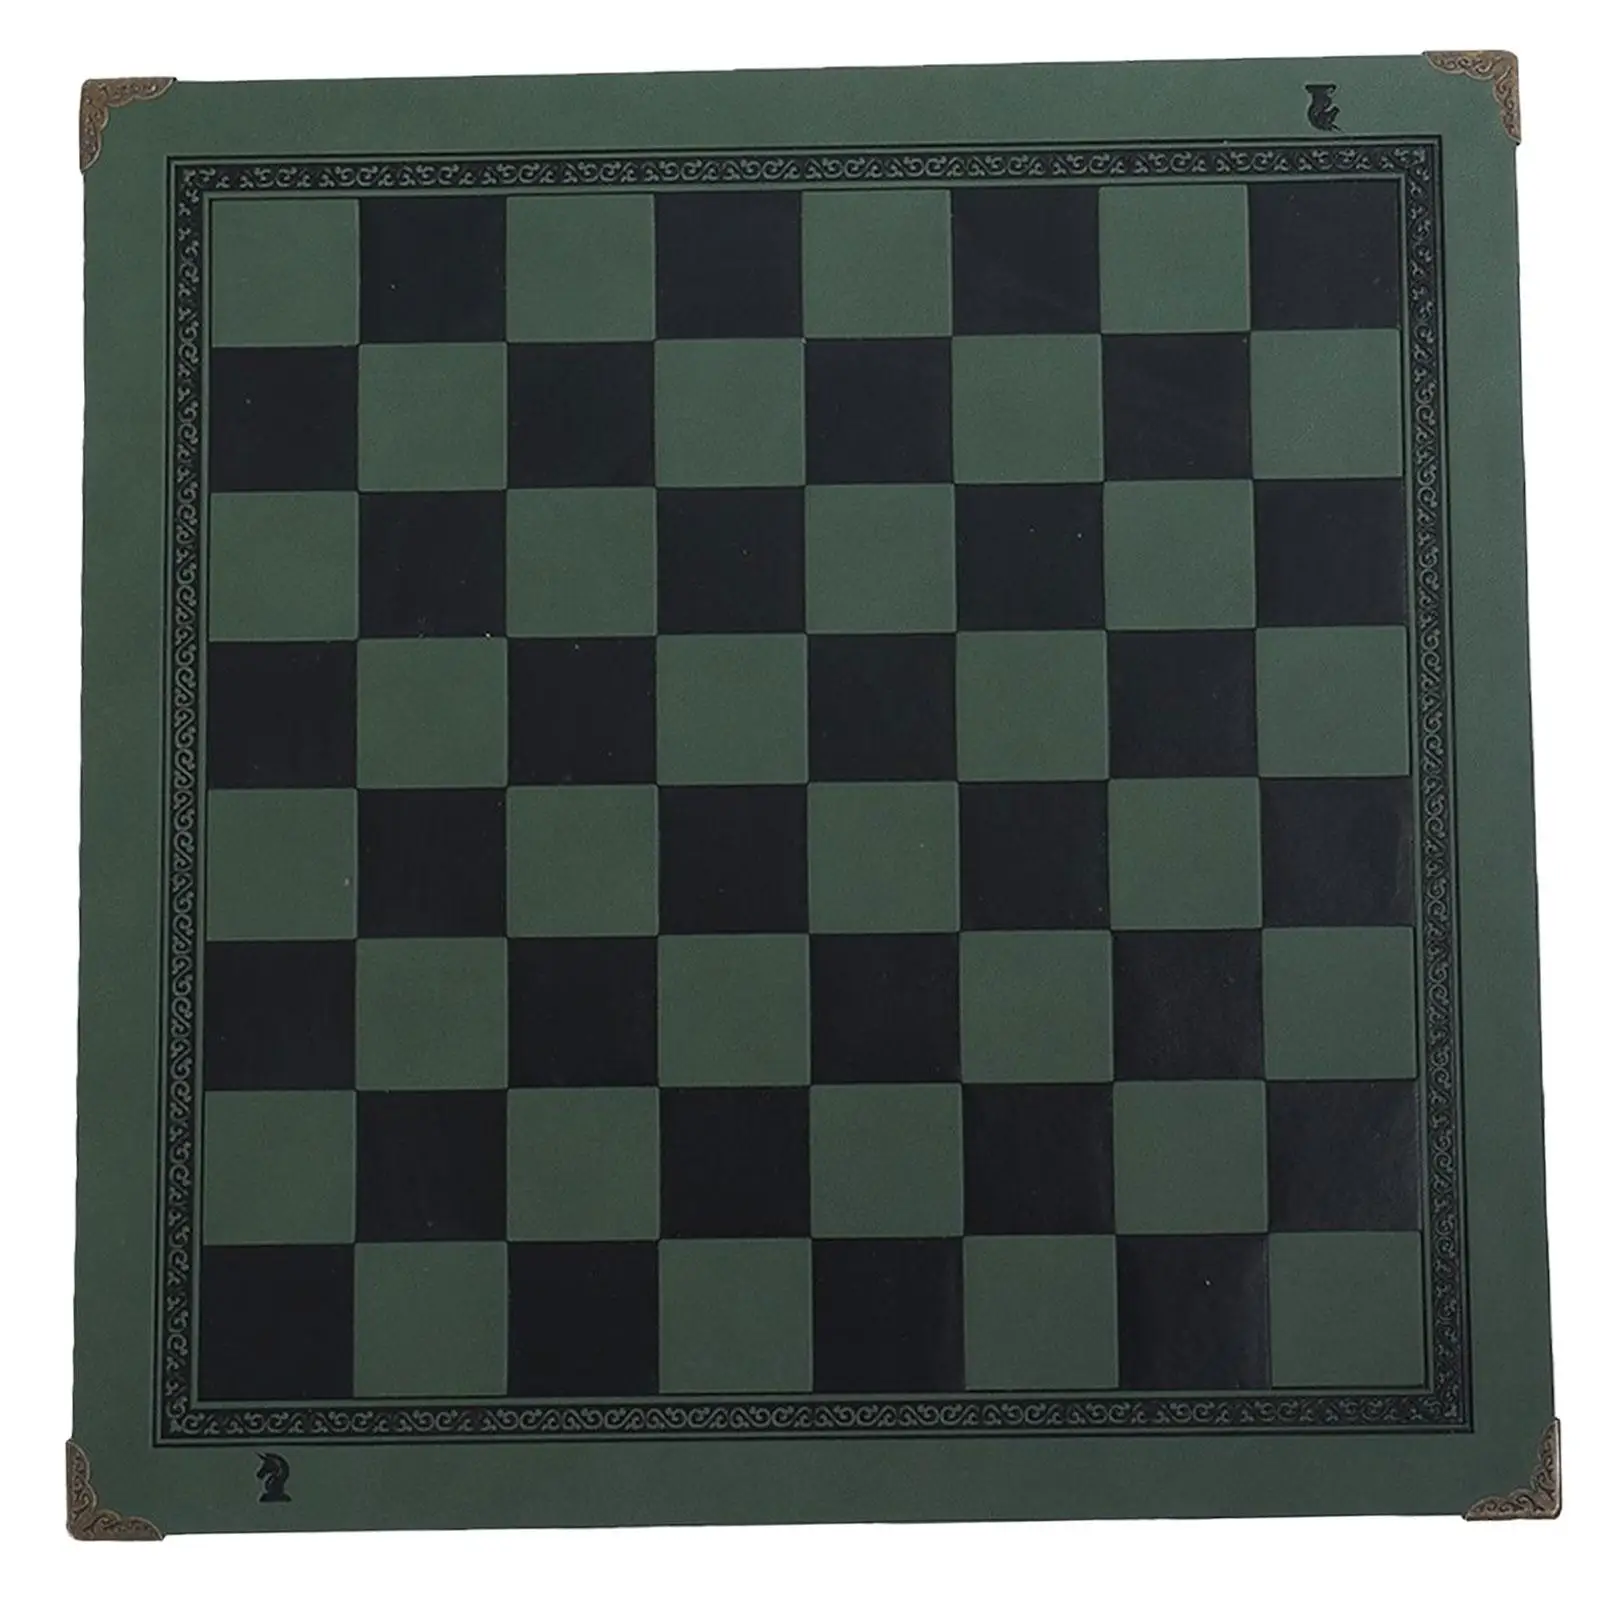 Chessboard Mat Waterproof Antiskid Wipeable Heat Resistant Chess Pad Mat for Chess Club Table Counter Top Patio Table Game